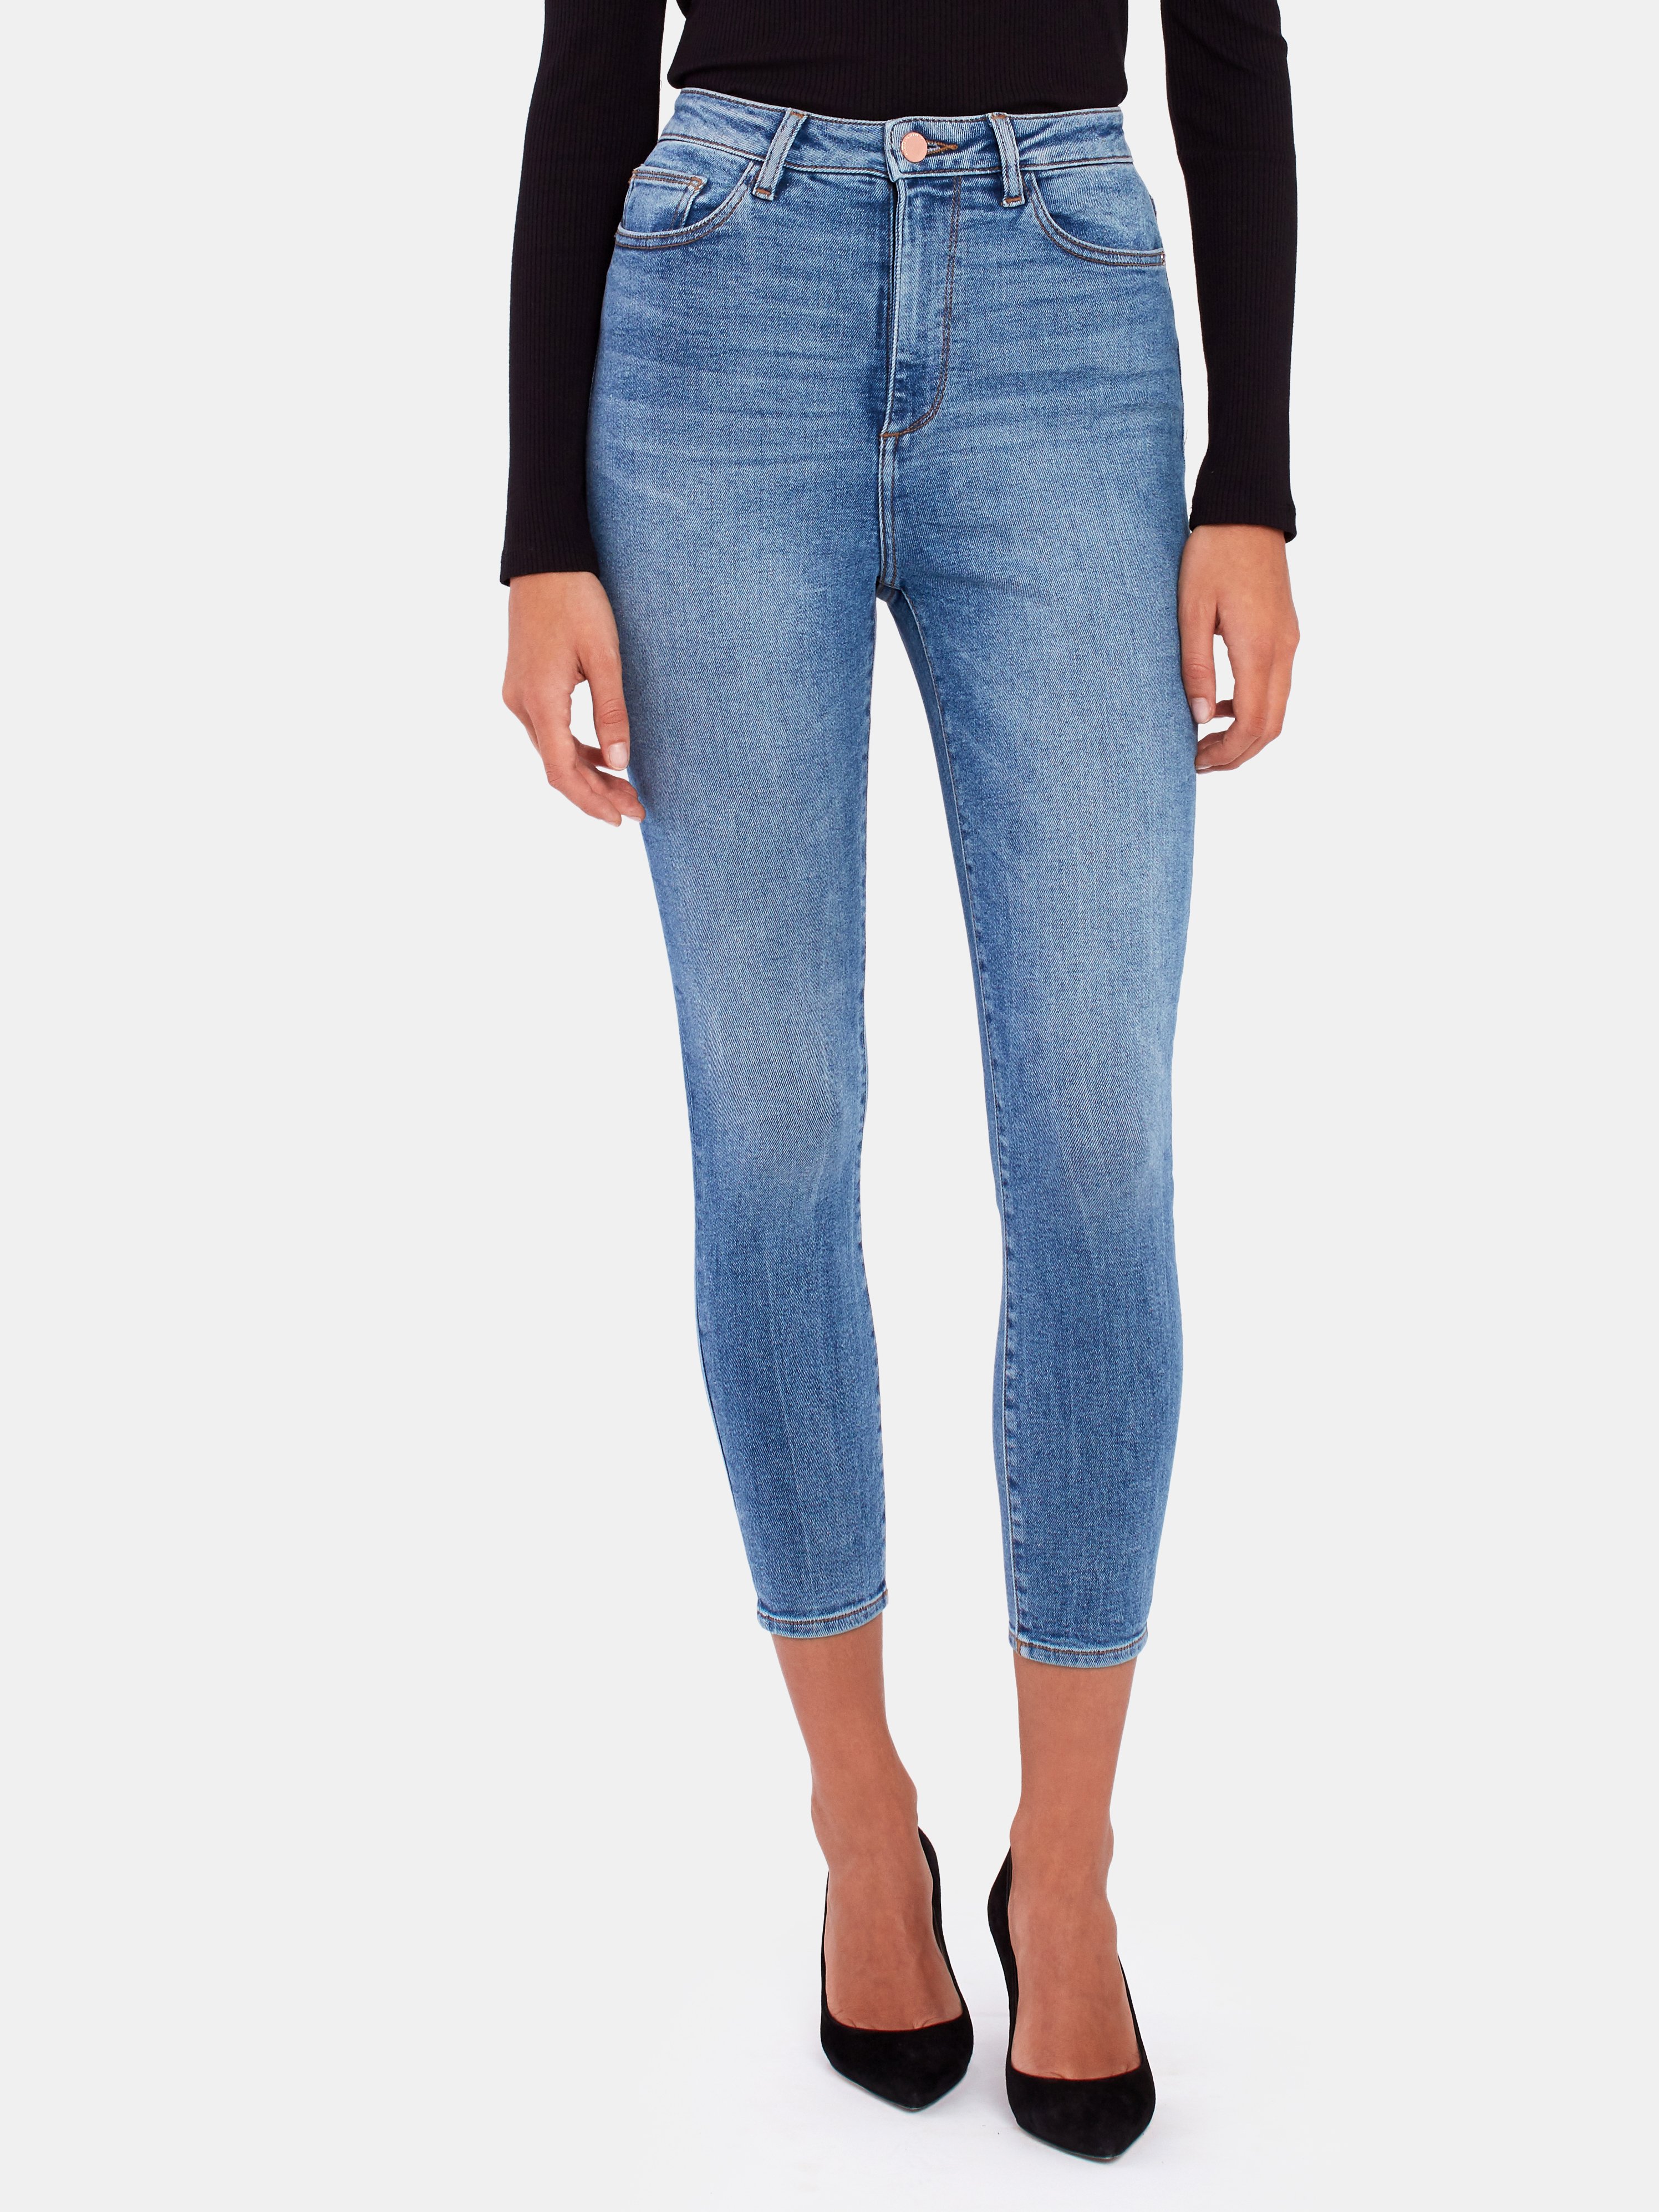 DL1961 Womens Chrissy Ultra High Rise Skinny Jeans